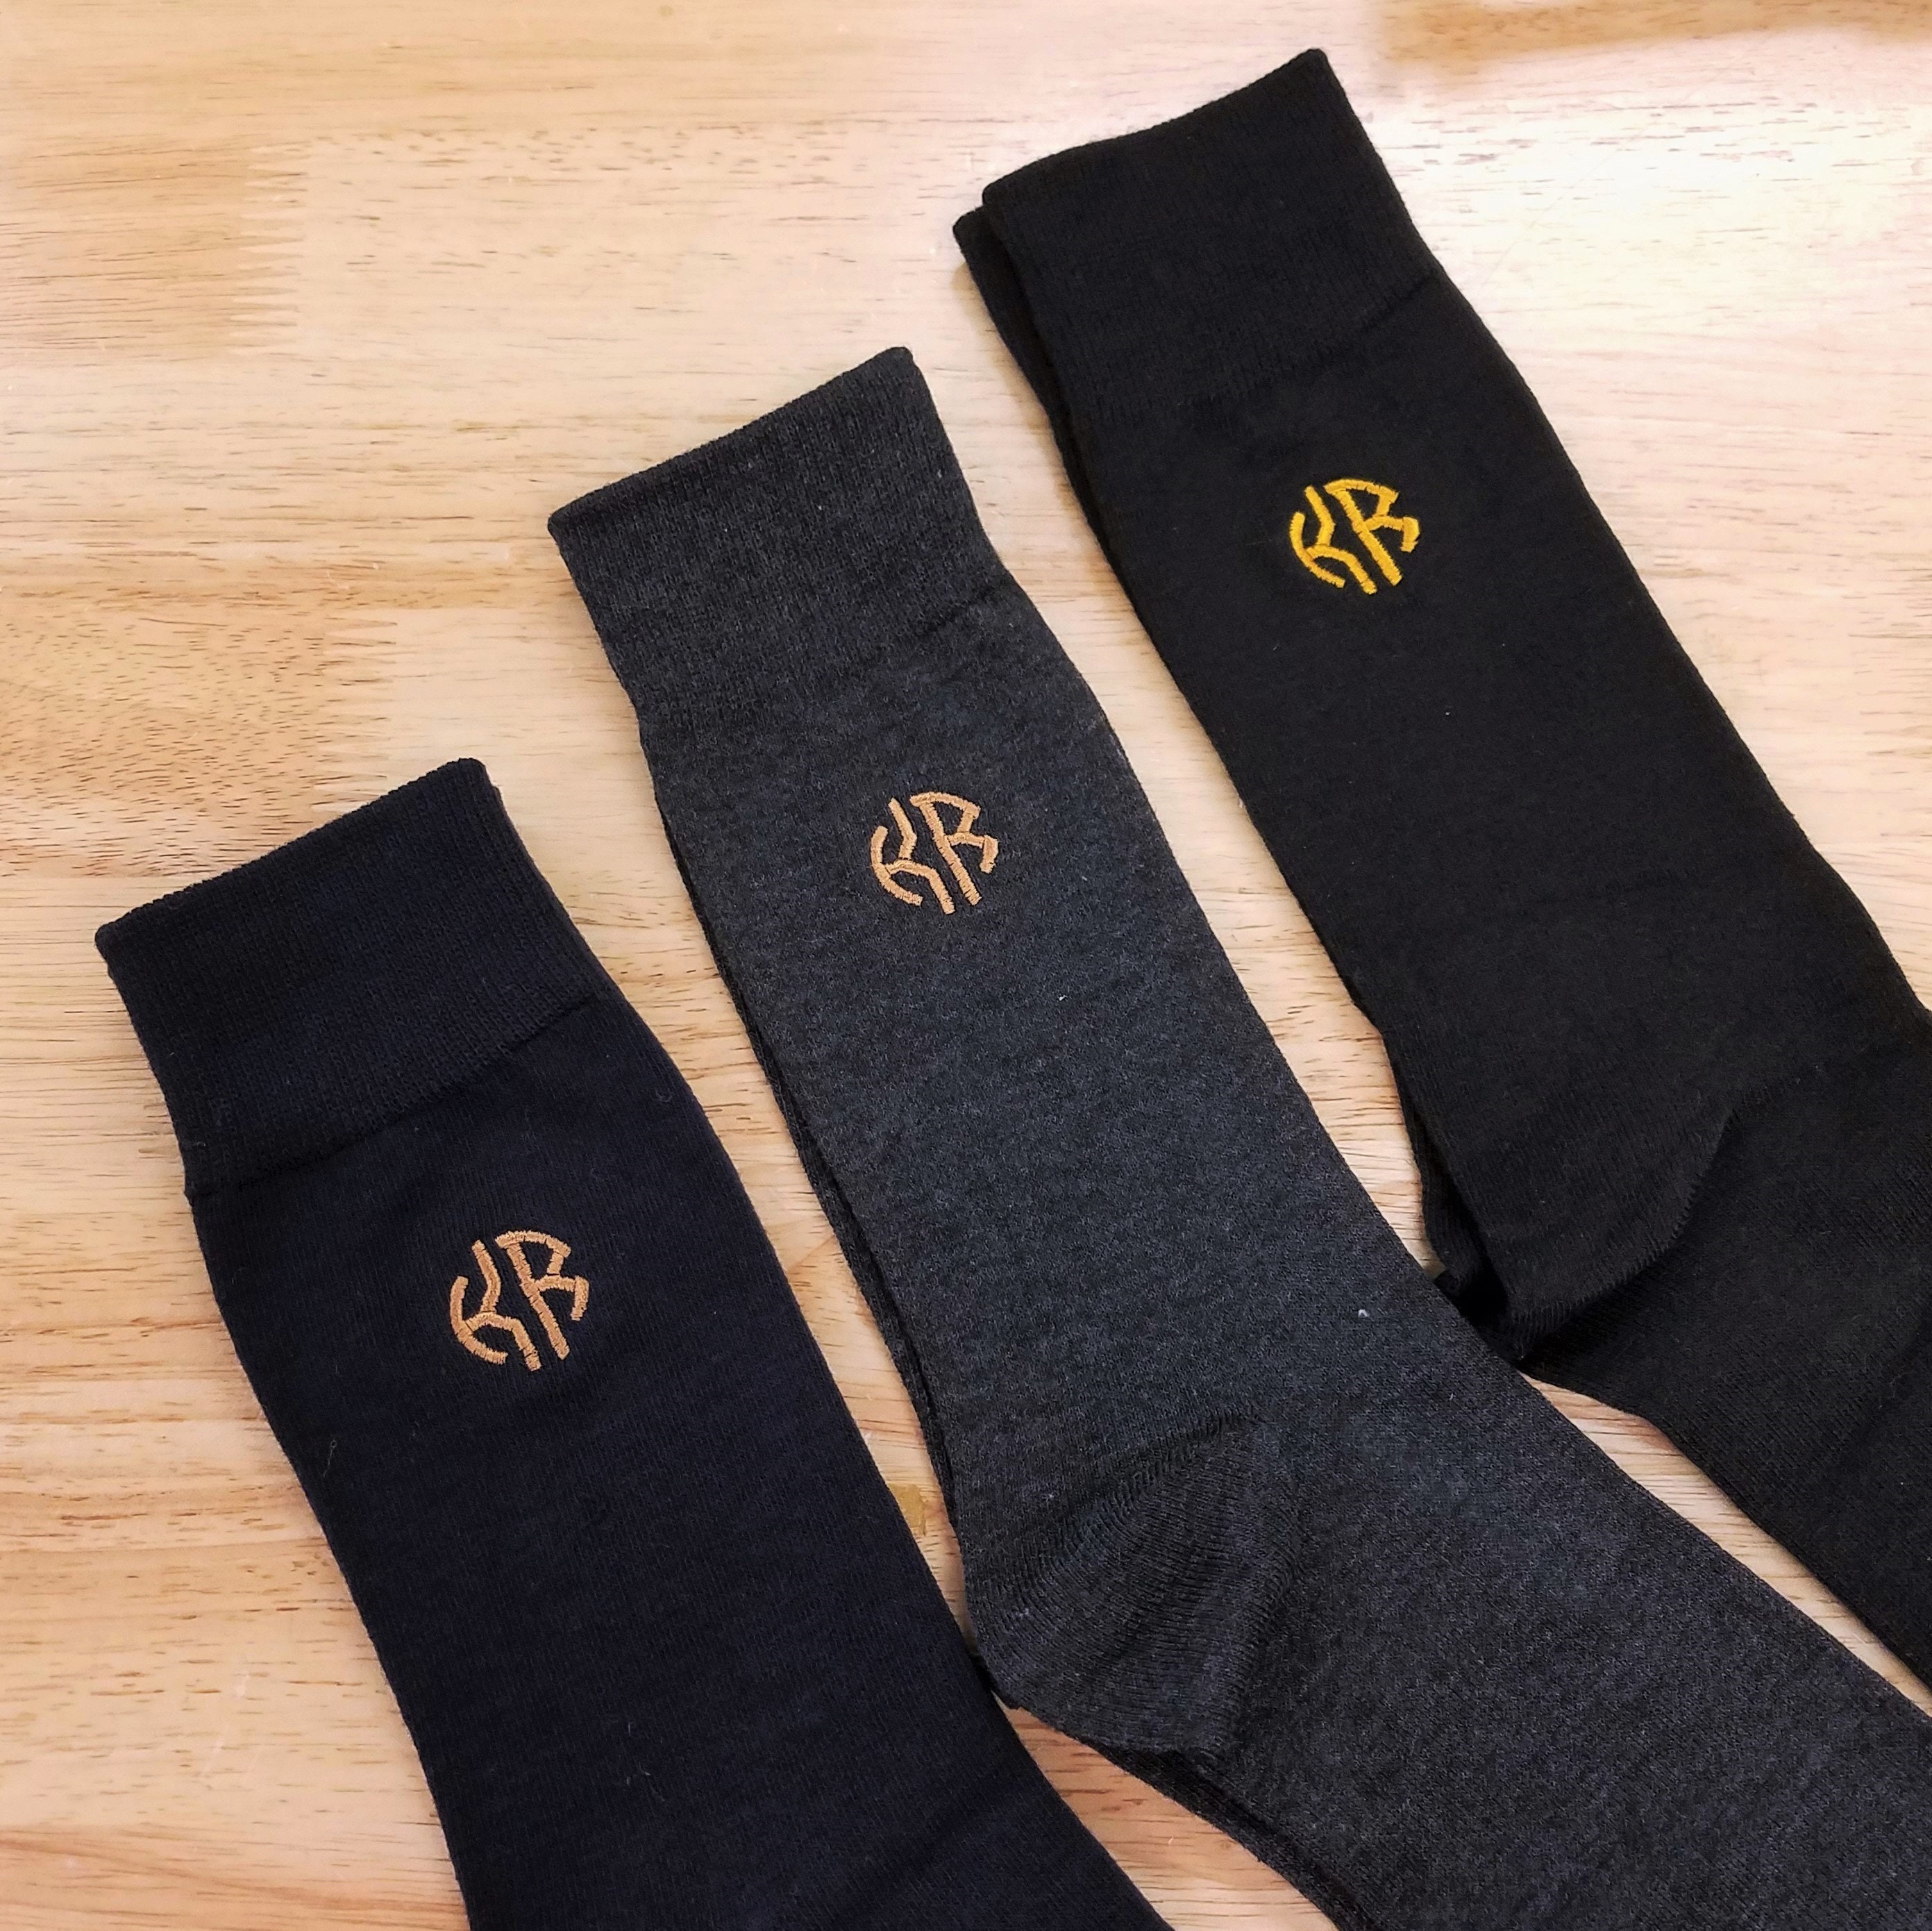 NWT LOUIS VUITTON ANKLE SOCKS - PRICE IS PER PAIR - BLACK ONLY